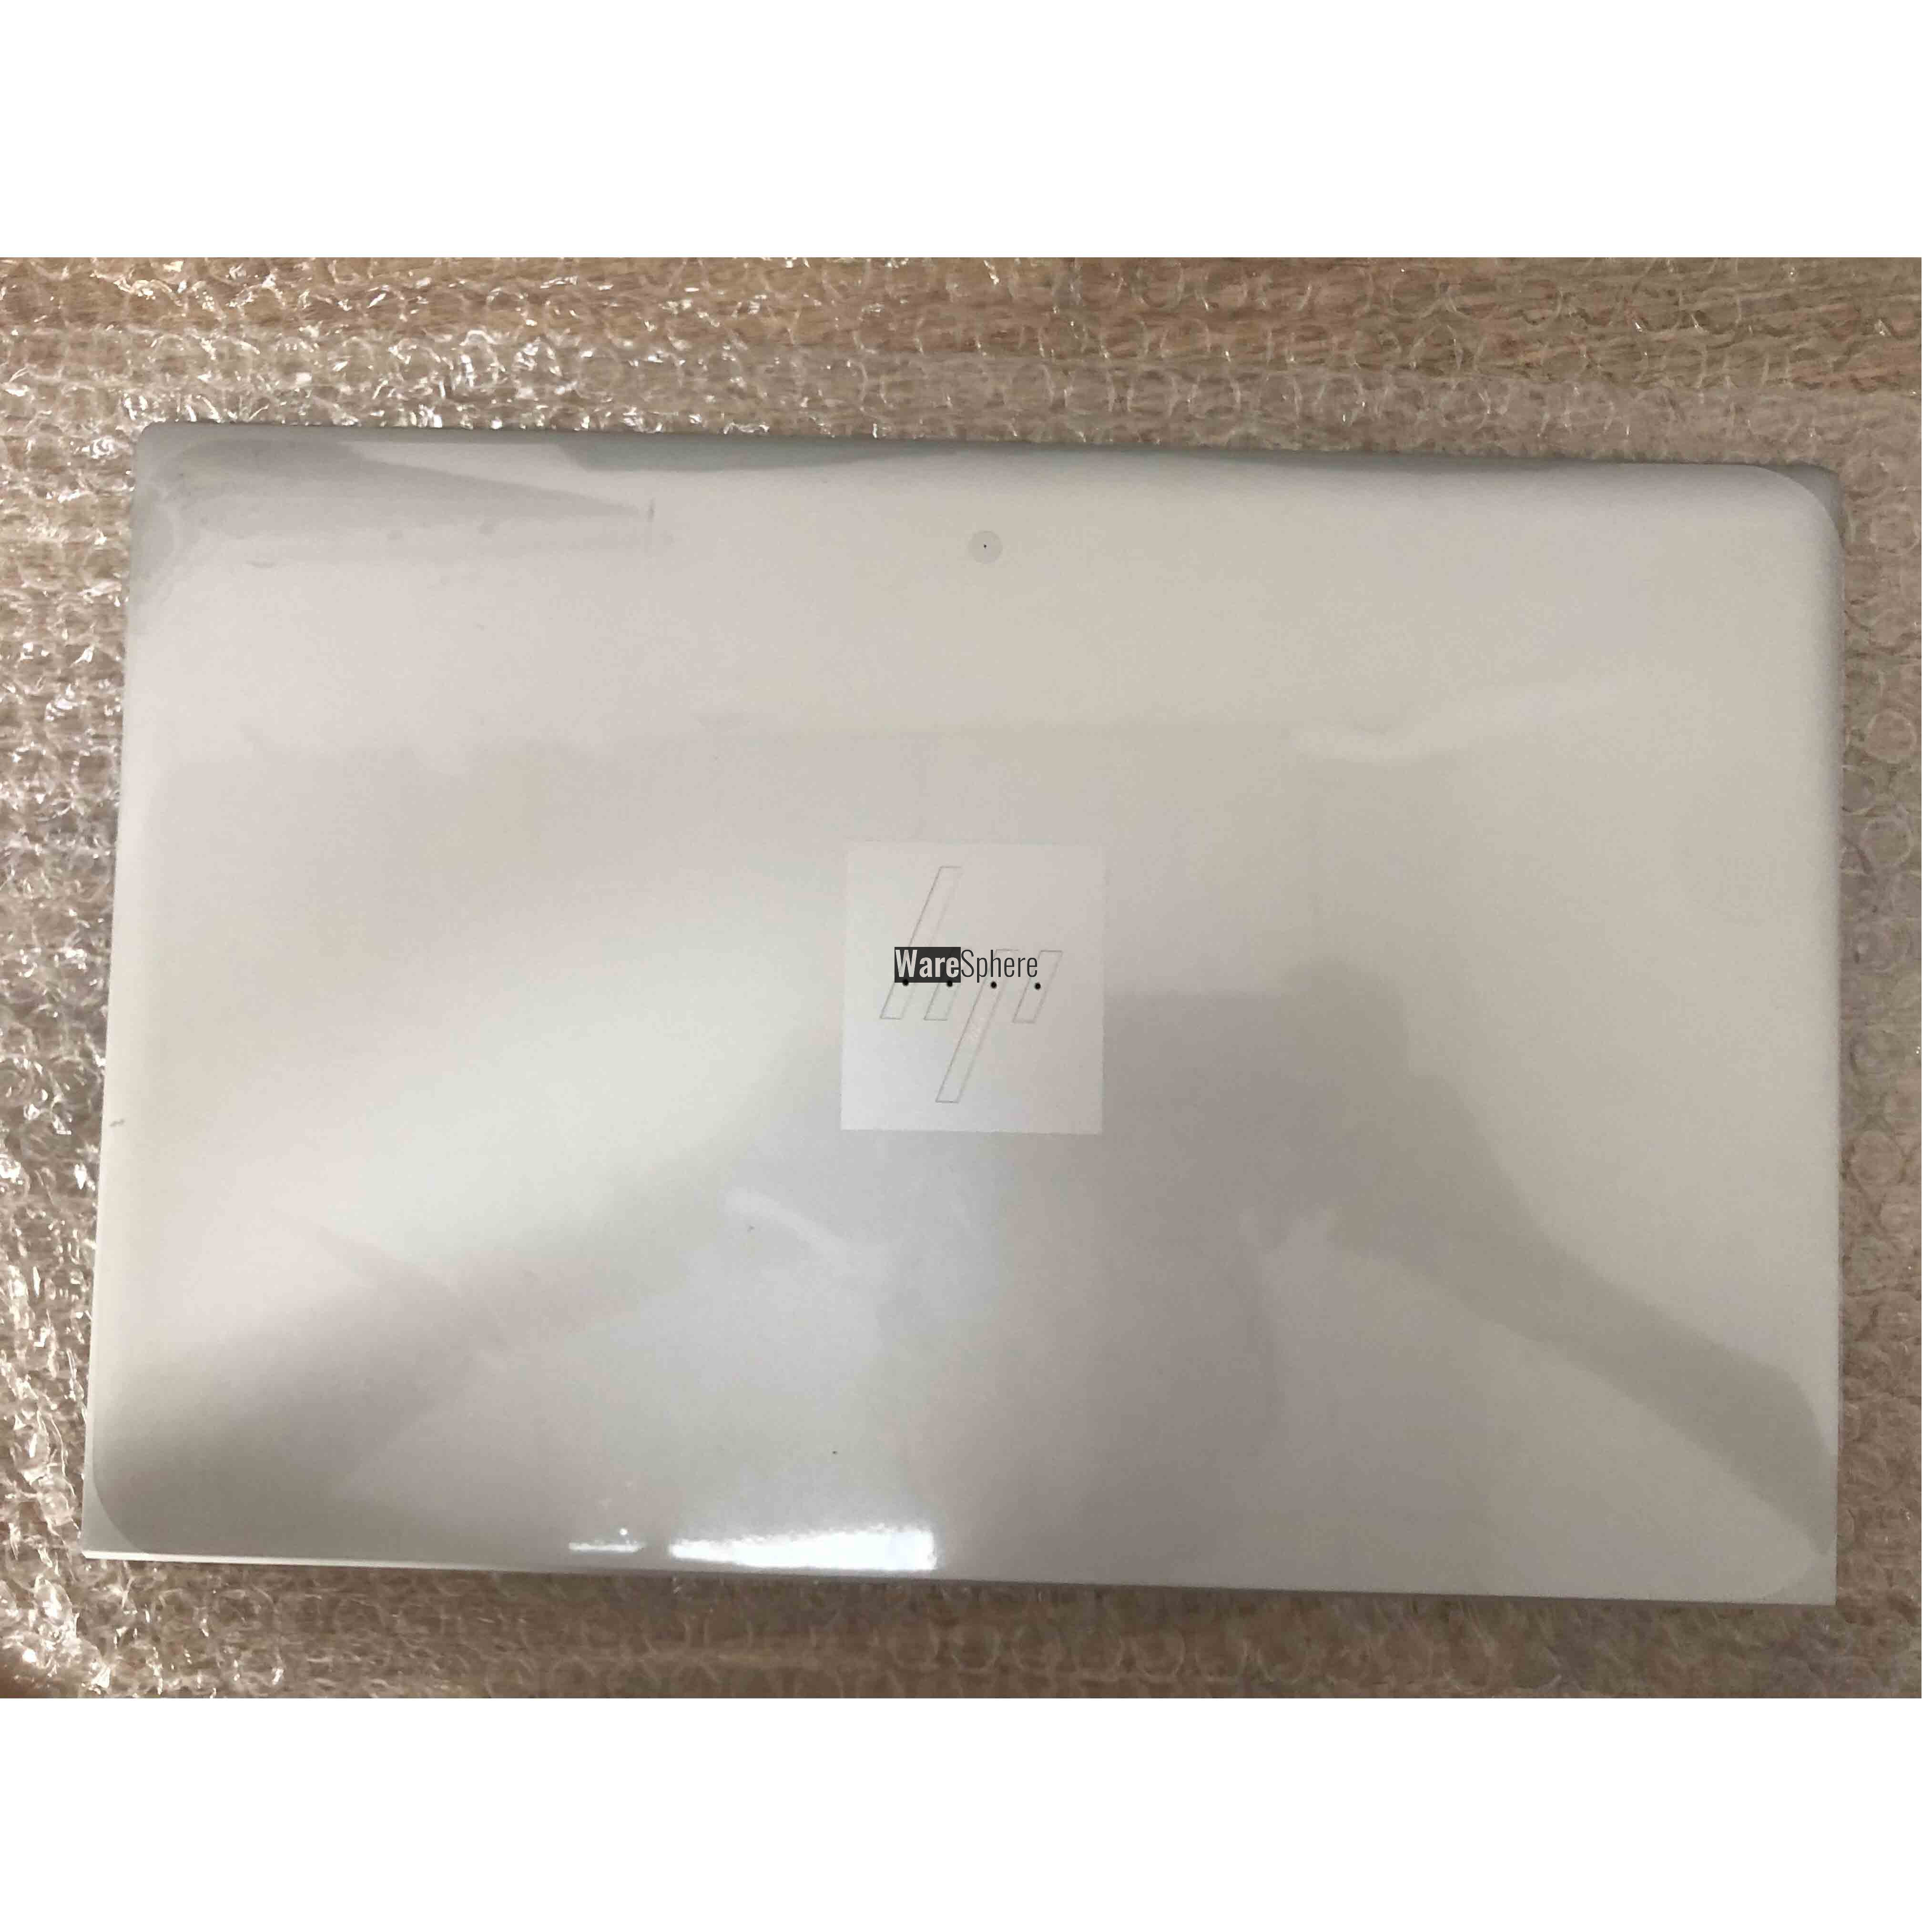 LCD Back Cover for HP ELITEBOOK 840 G8 6070B1848101 Silver